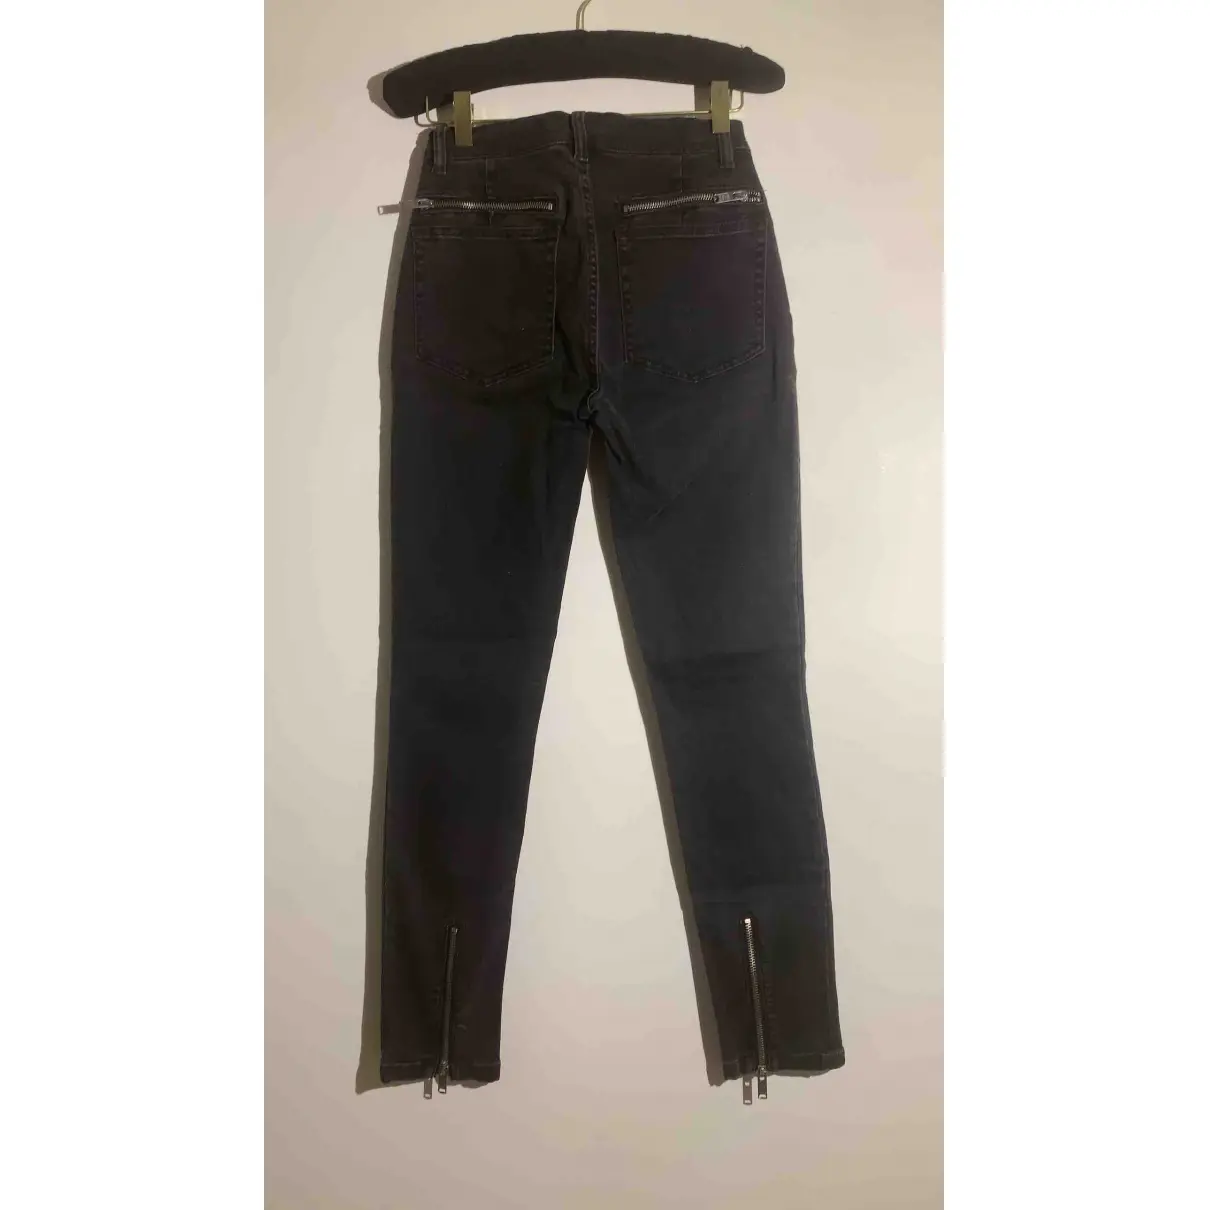 Buy Marc by Marc Jacobs Slim jeans online